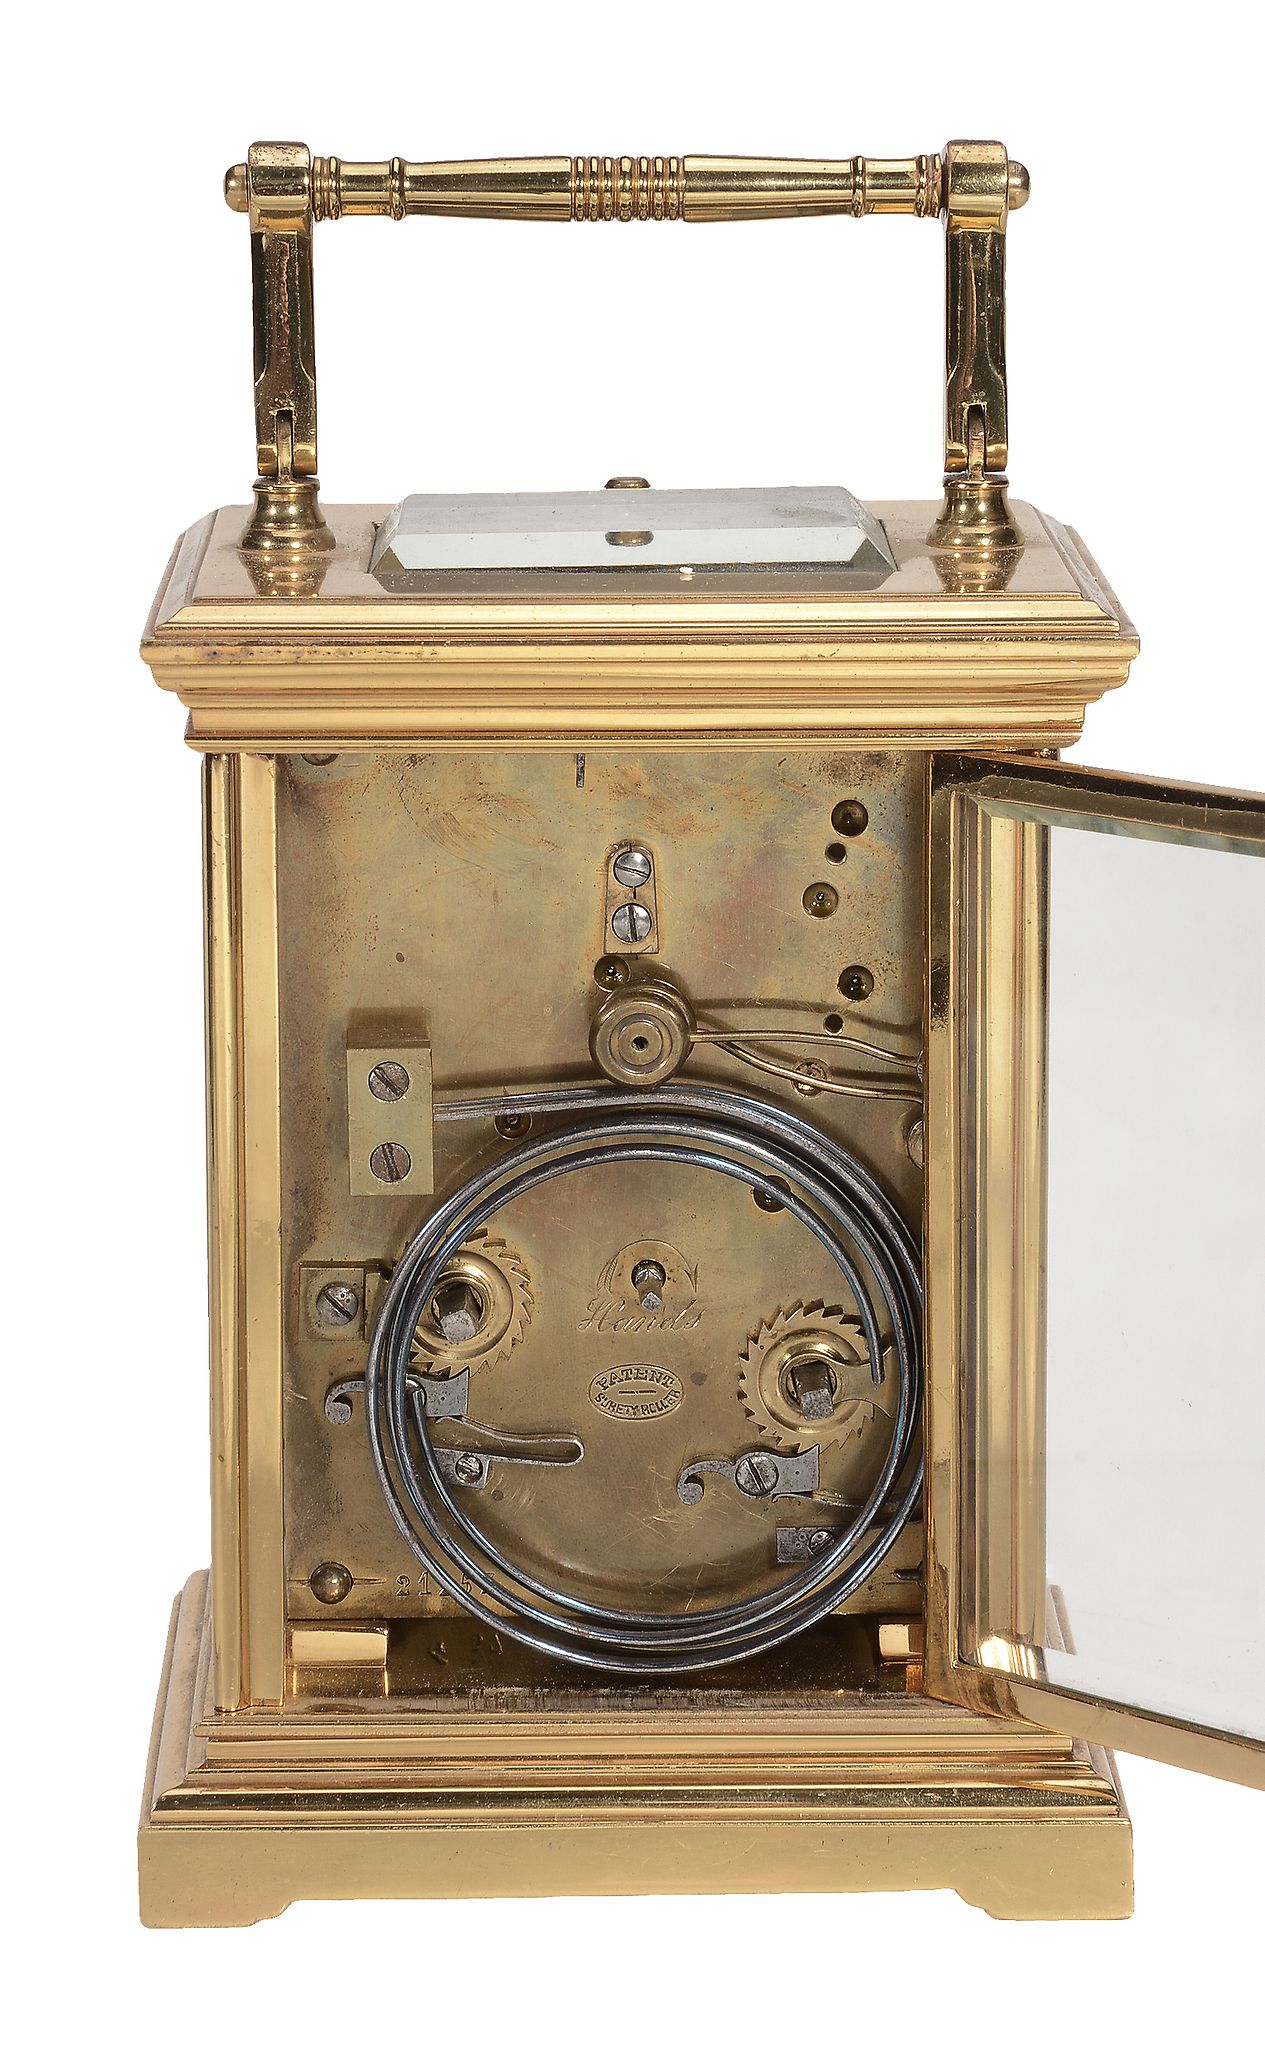 A French laquered brass petite sonnerie striking carriage clock with... - Image 2 of 3